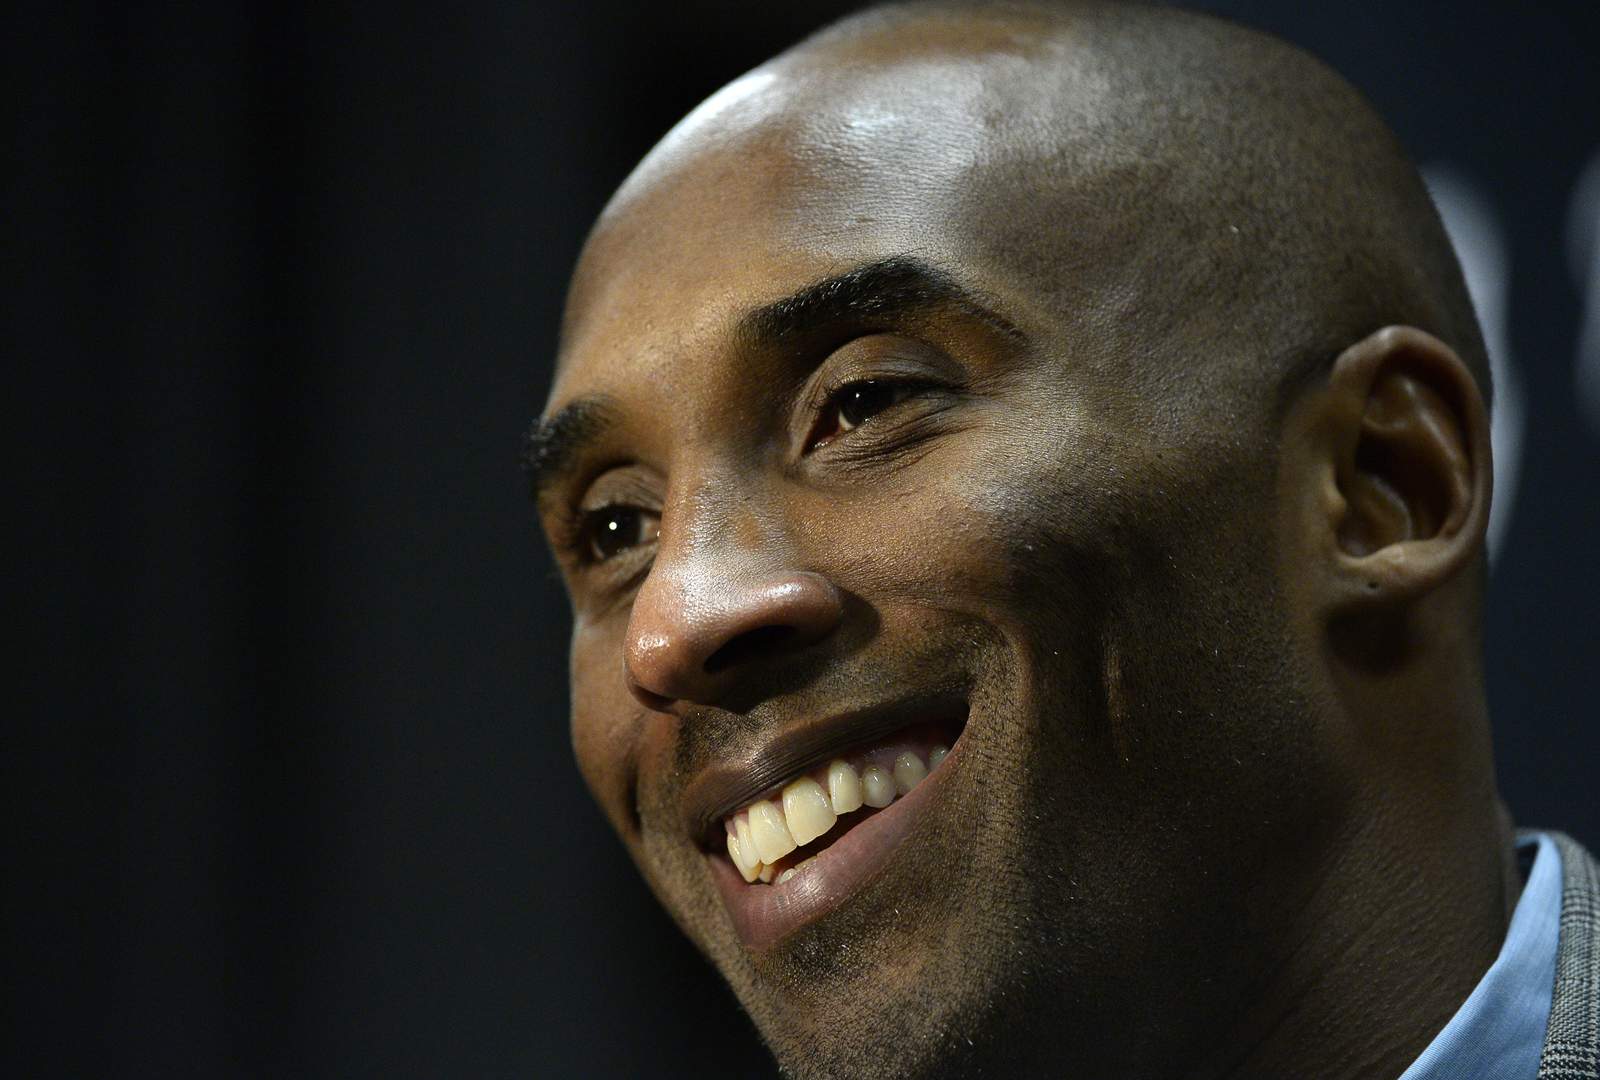 Kobe Bryant speaks in a news conference after announcing his retirement at Staples Center on Nov. 29, 2015.